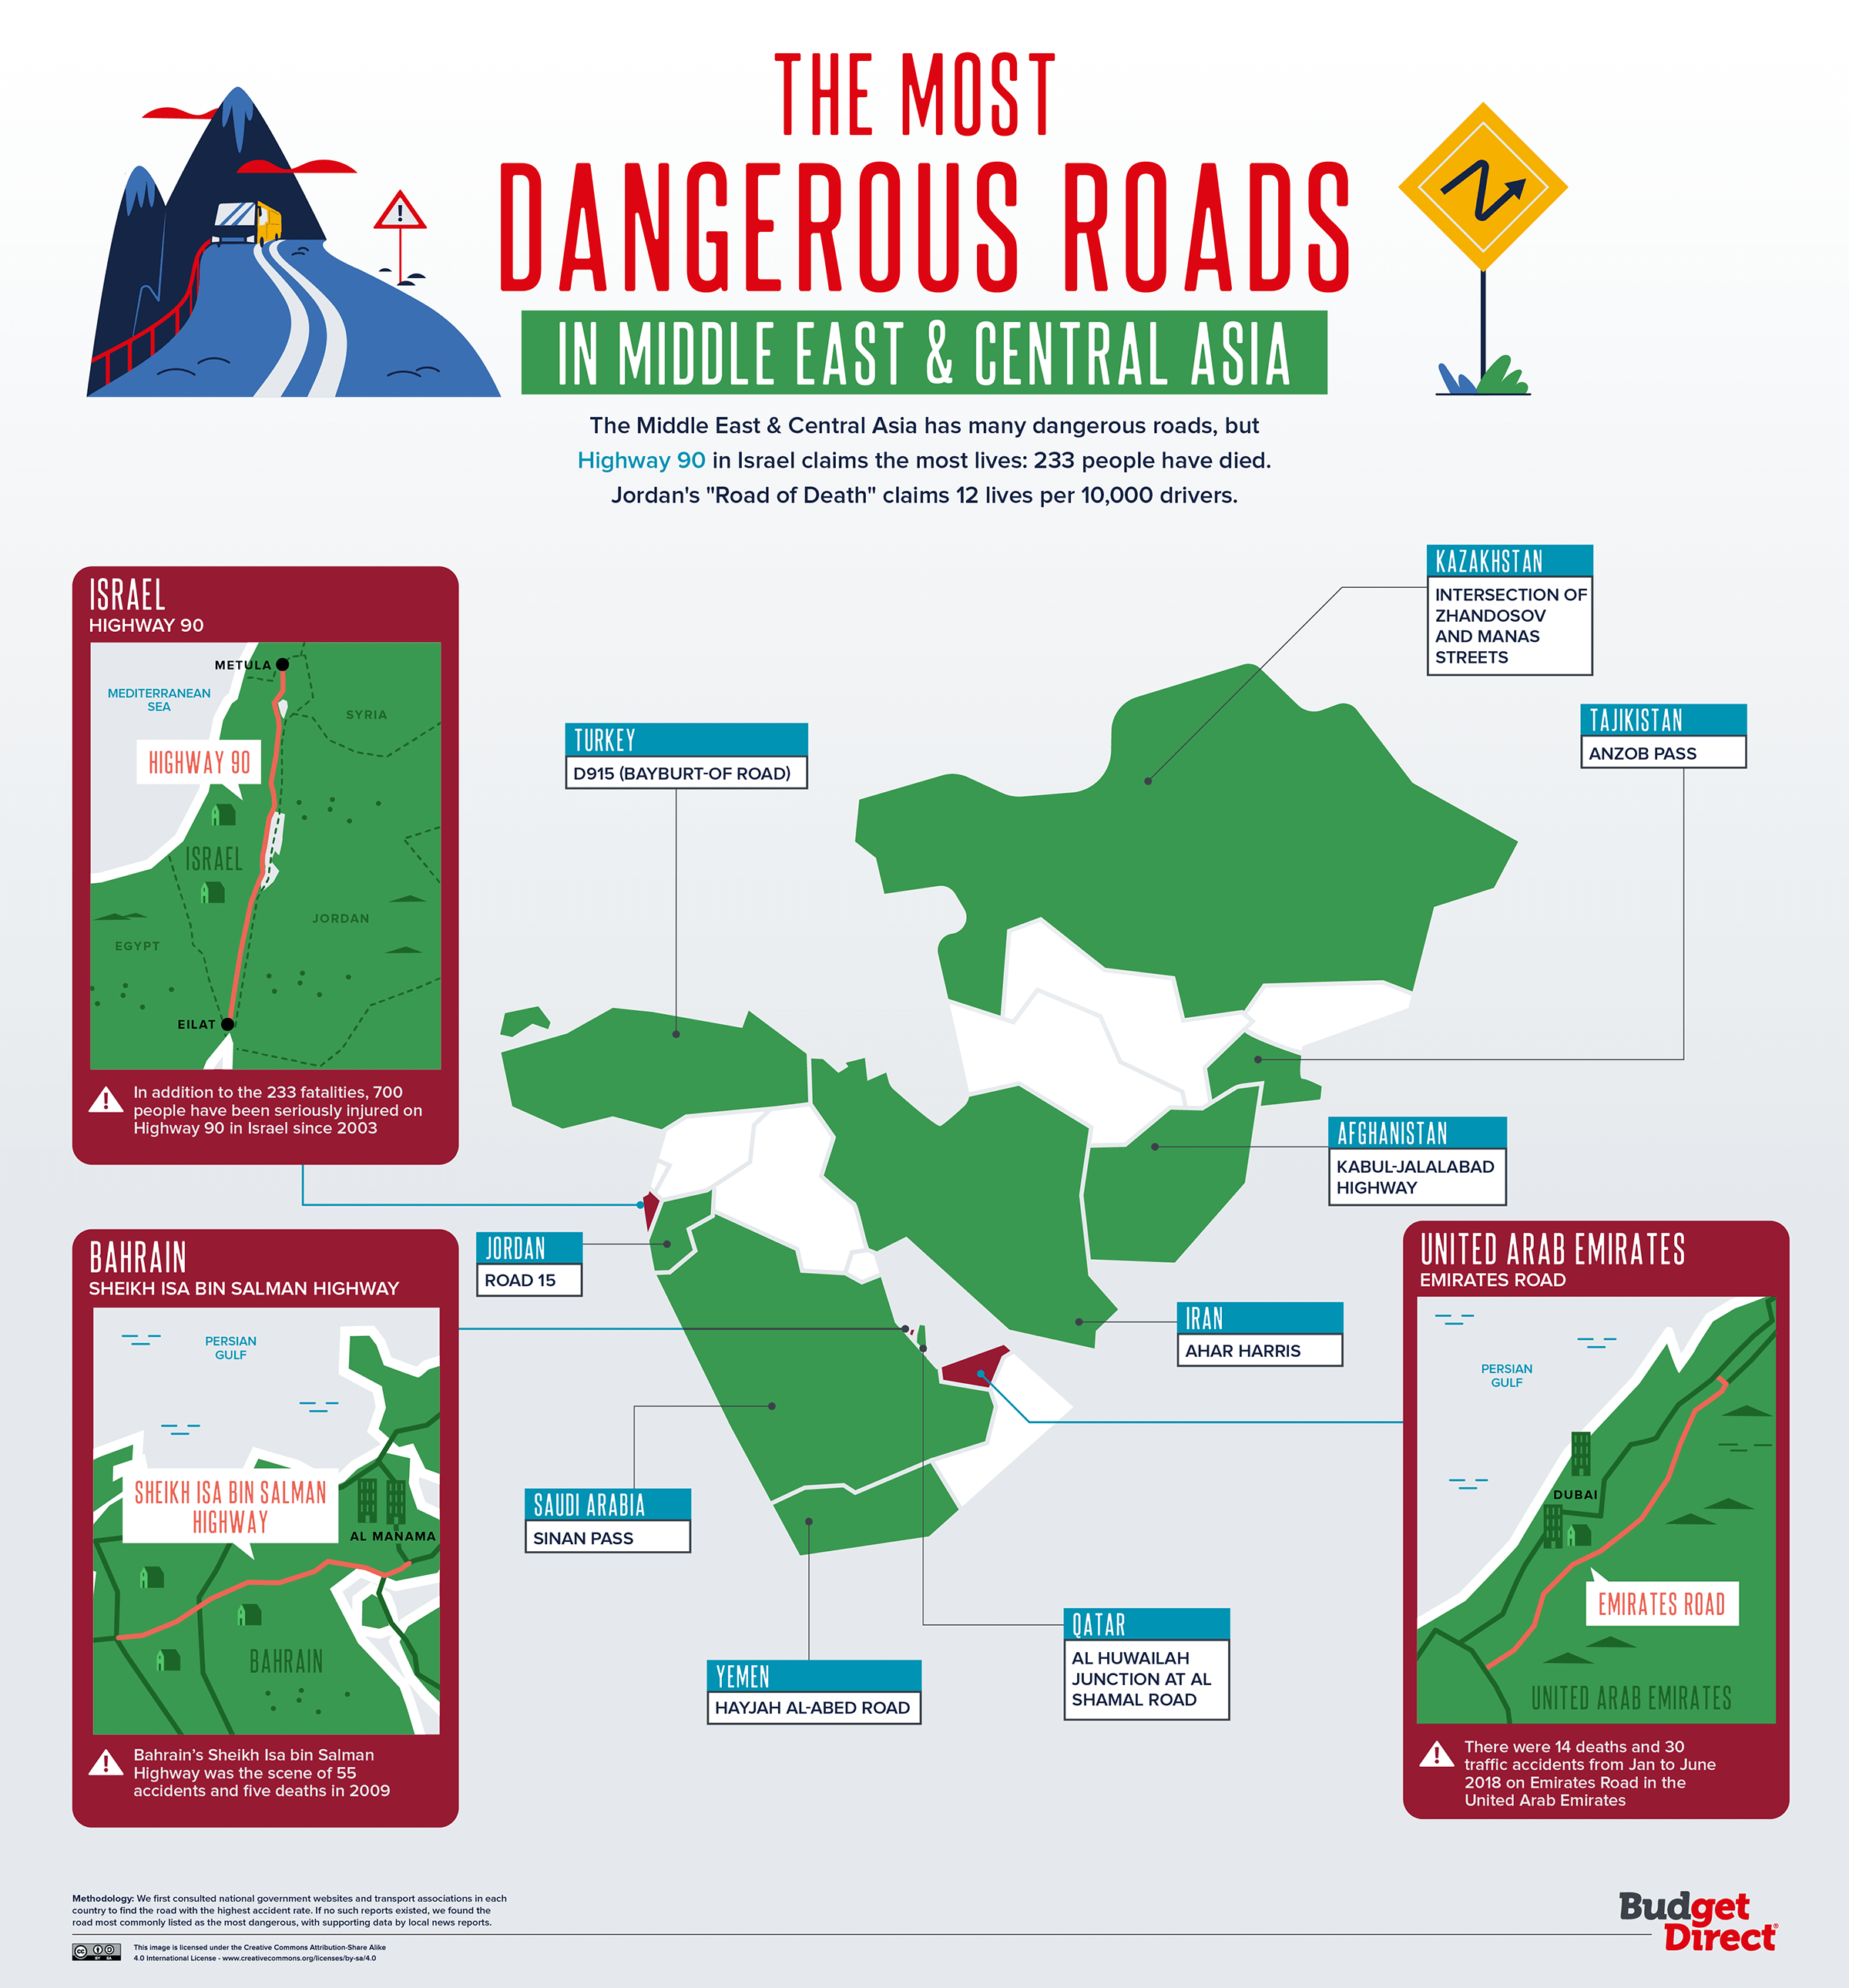 The most dangerous roads in Middle East & Central Asia